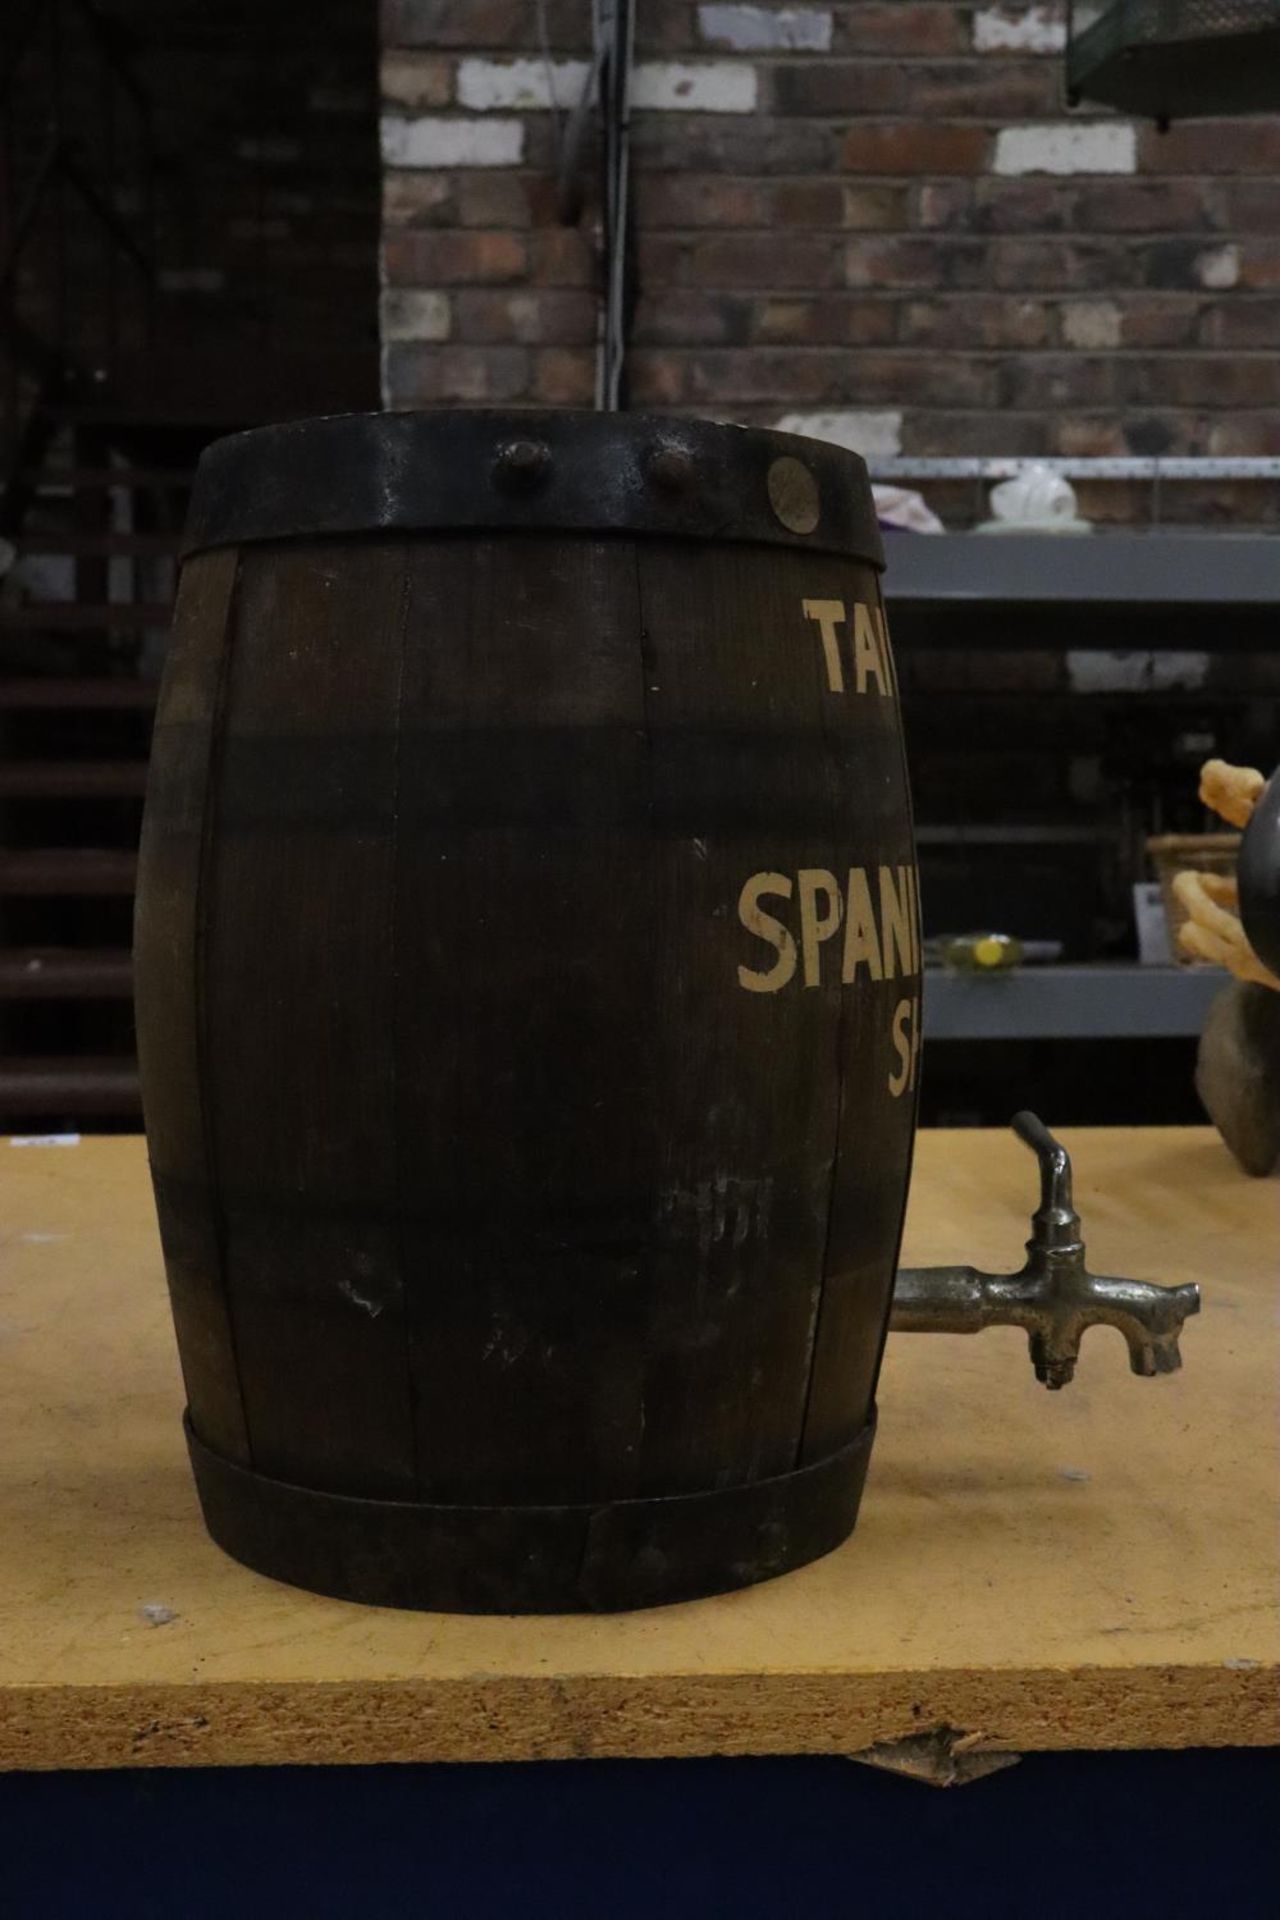 A BANDED OAK BARREL 'TANNERS' SPANISH MEDIUM SHERRY, HEIGHT 28CM - Image 2 of 4